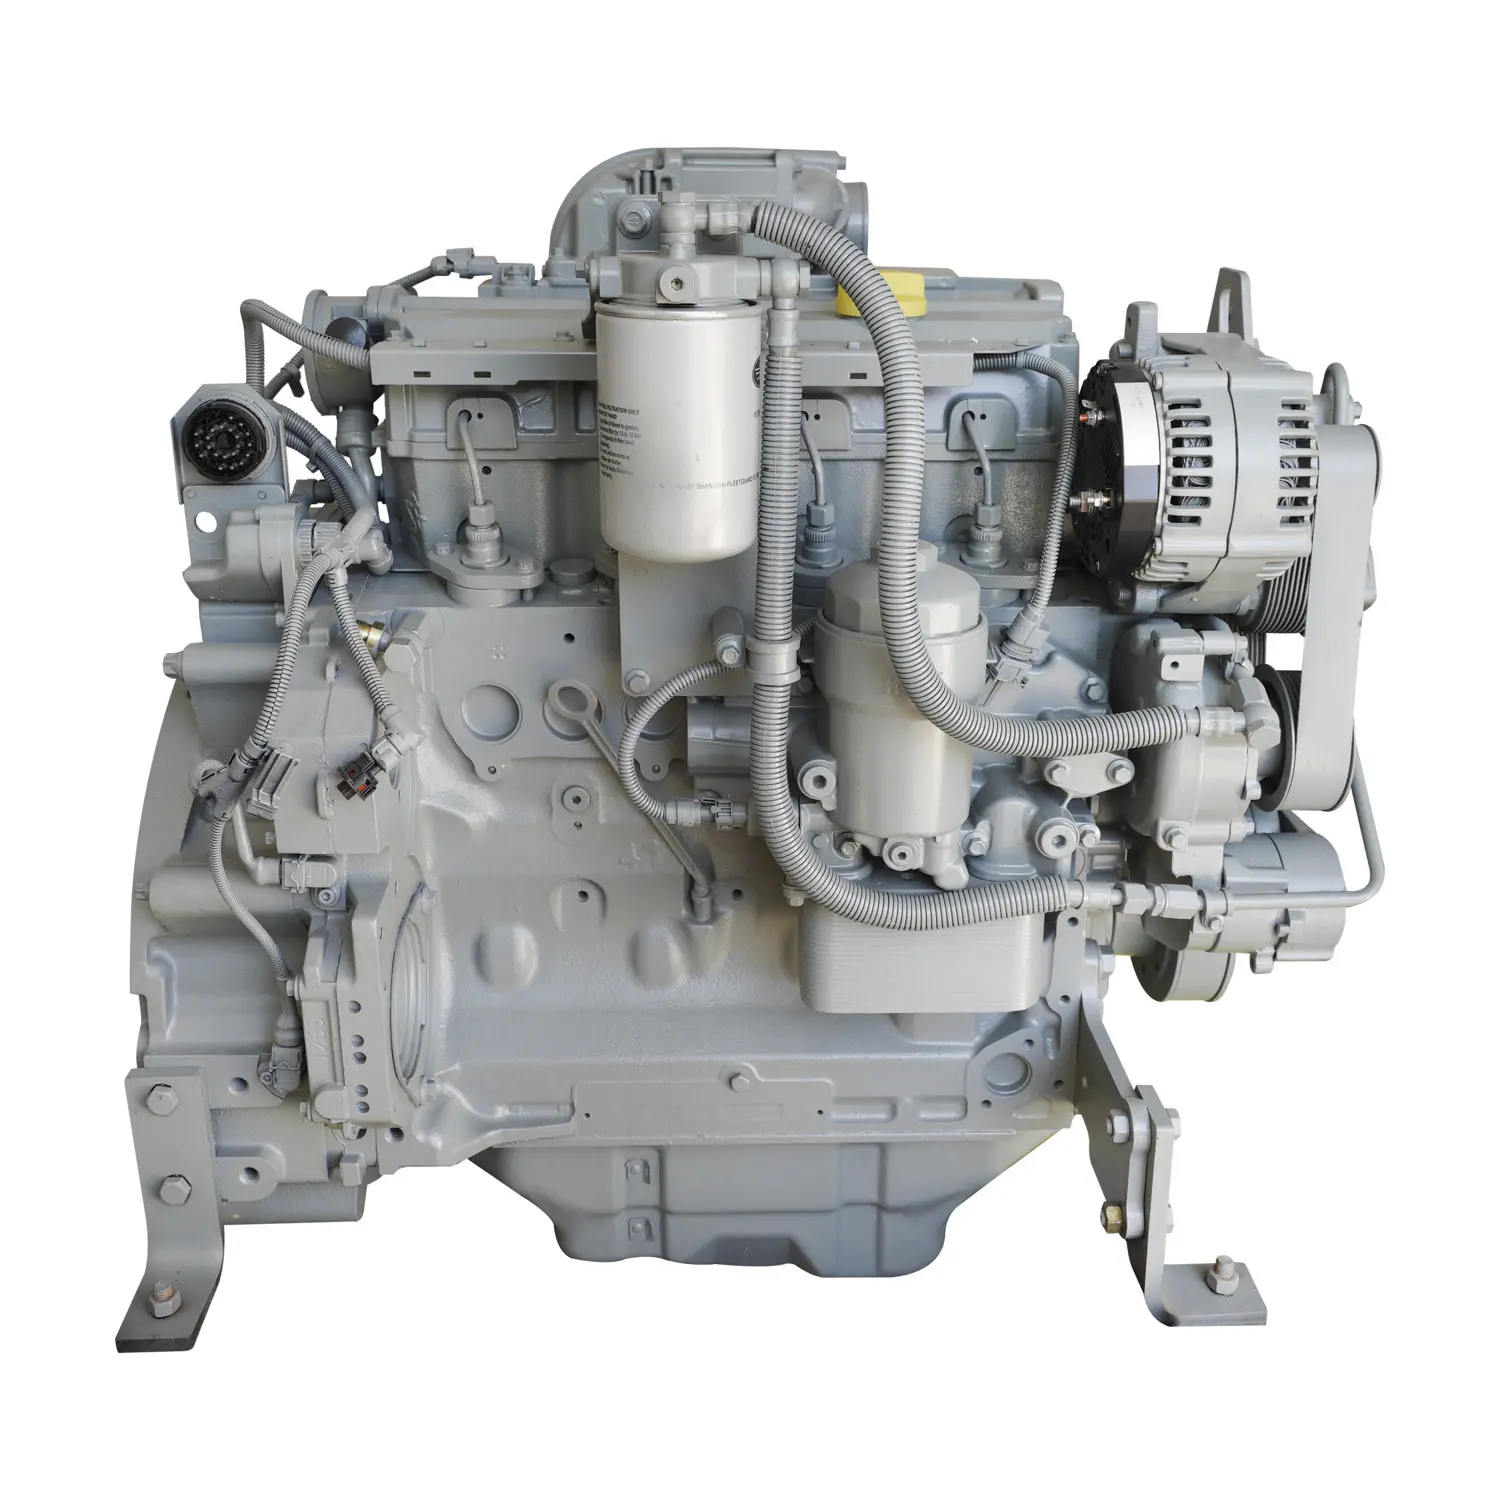 BF4M2012C Water Cooled Turbocharged Diesel Engine Used For Industry